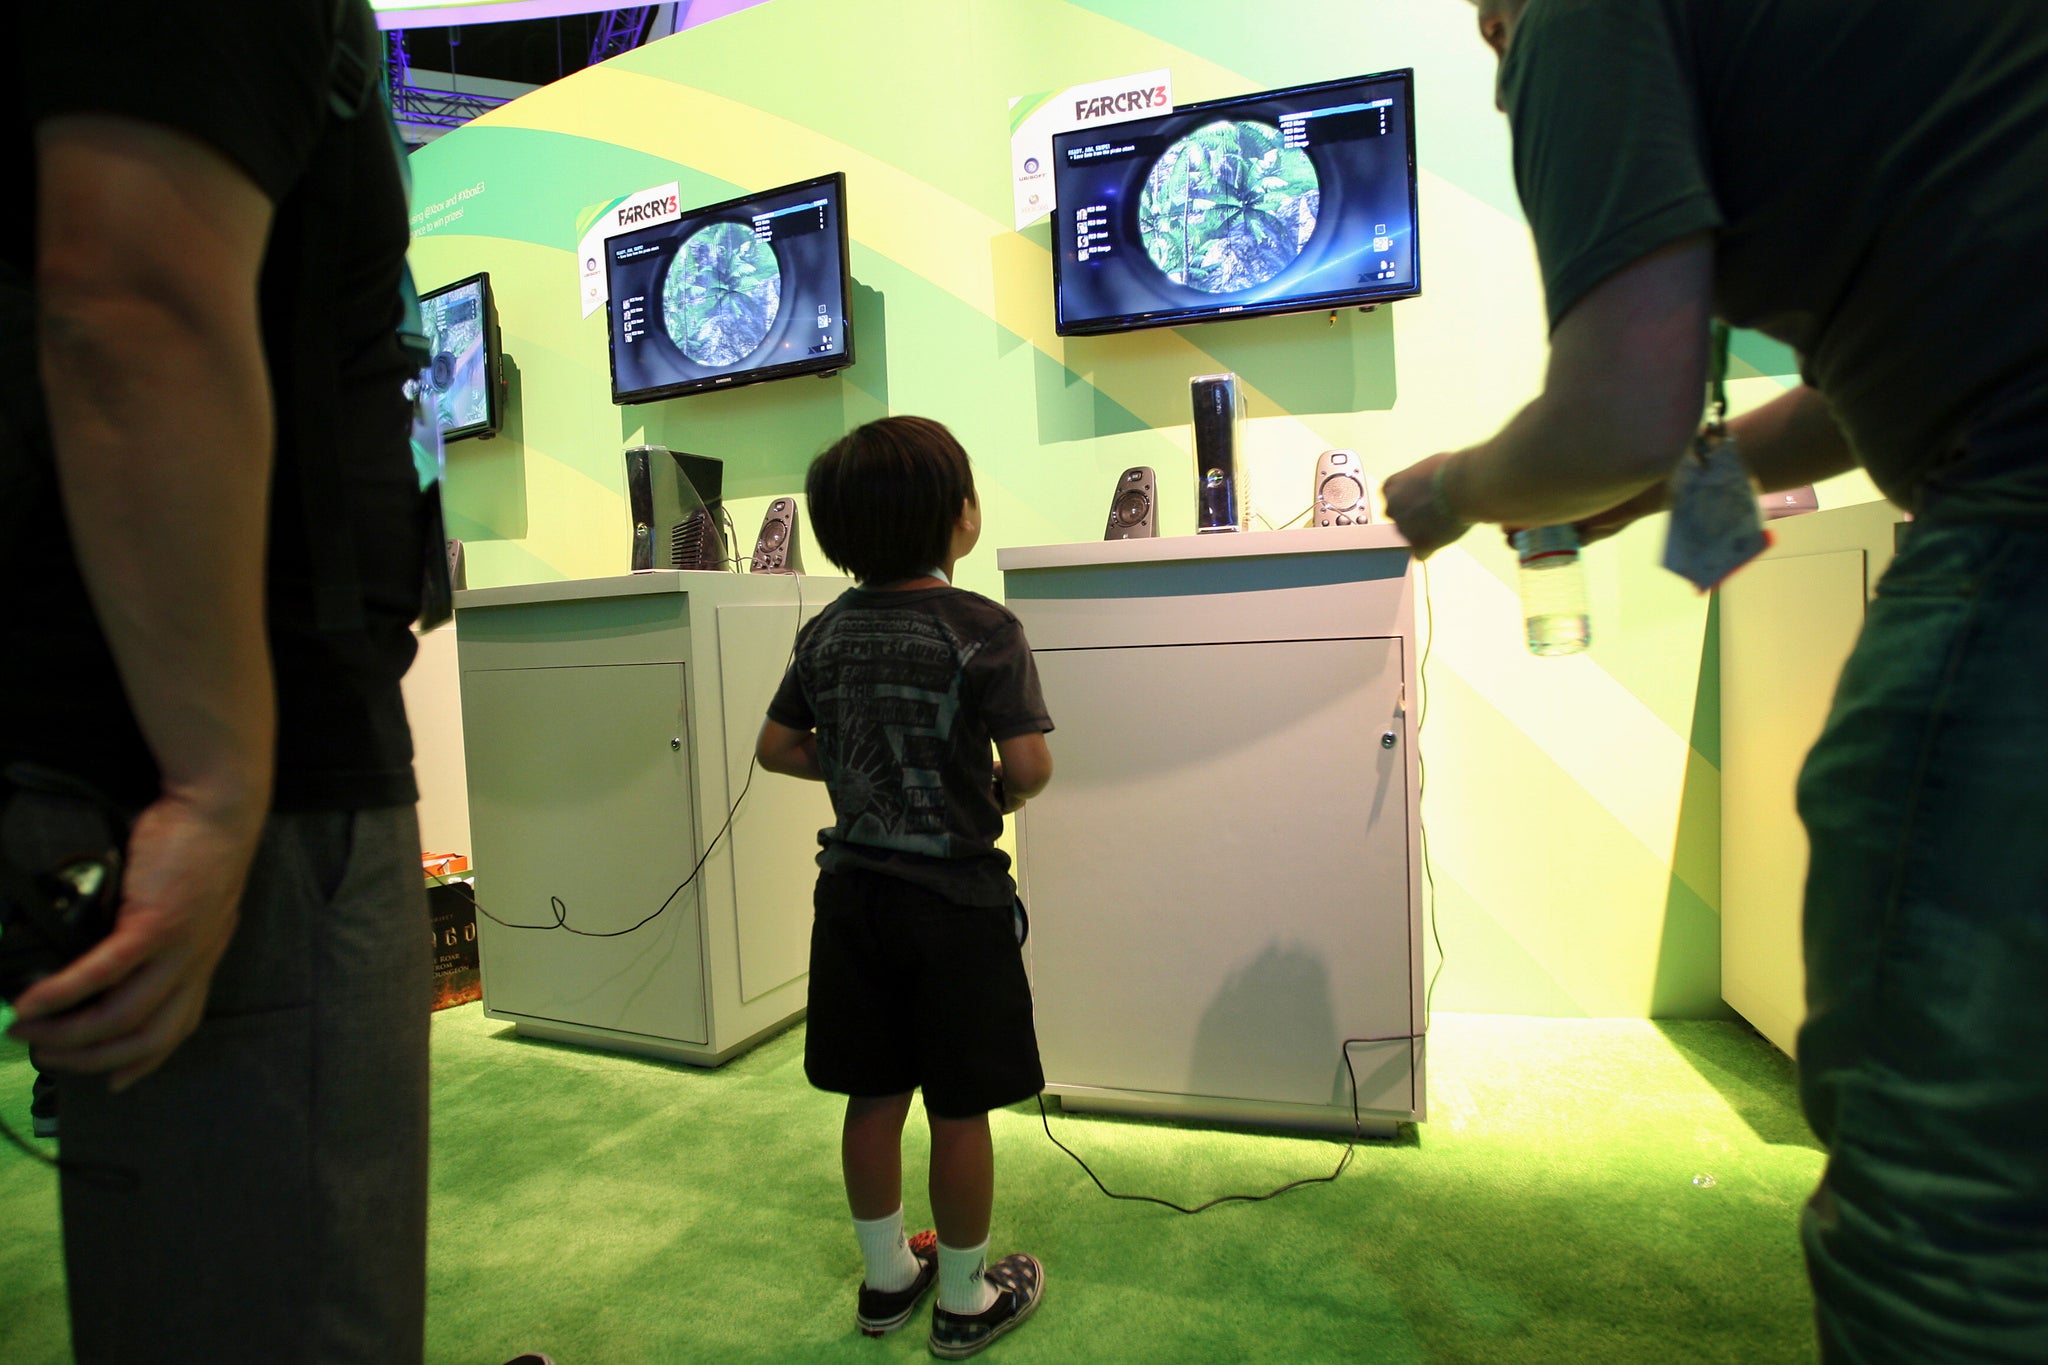 Eight-year-old Travis Hong (C) plays "Far Cry 3" at the Electronic Entertainment Expo (E3), source: Reuters